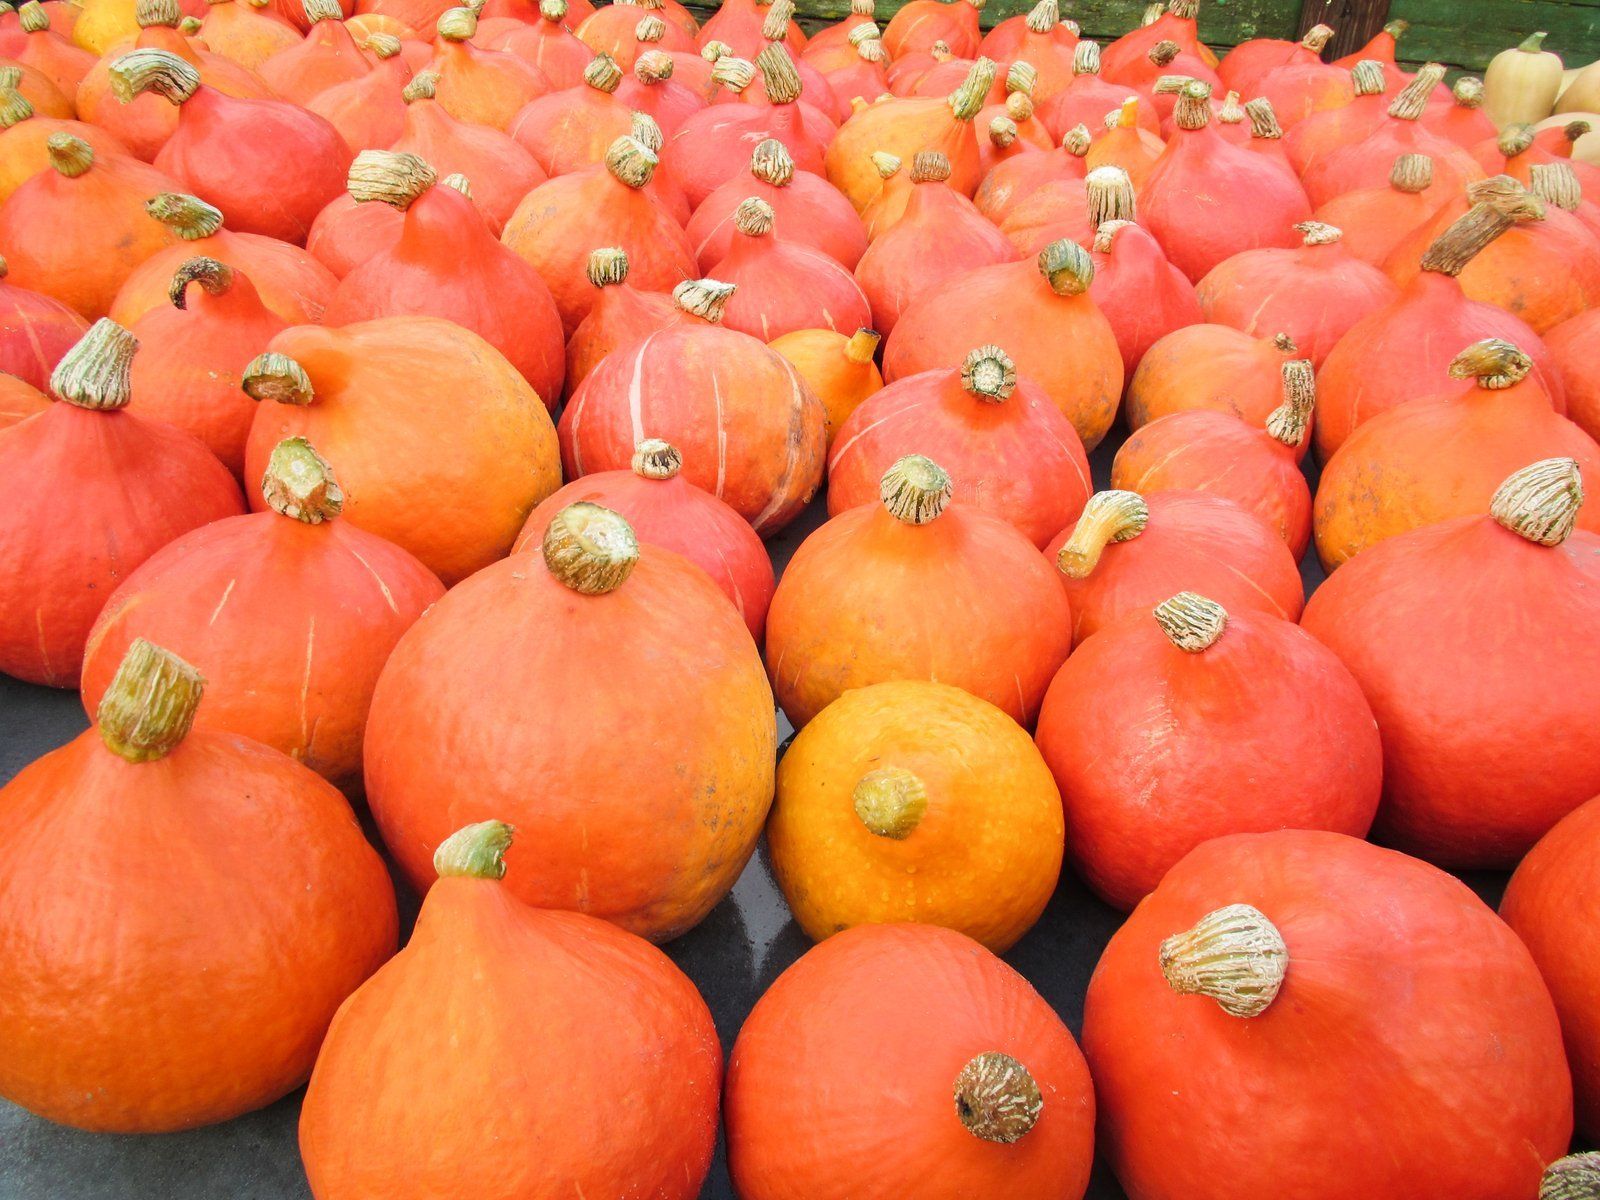 Red Kuri Winter Squash and Ribeye Steaks Available The Week!